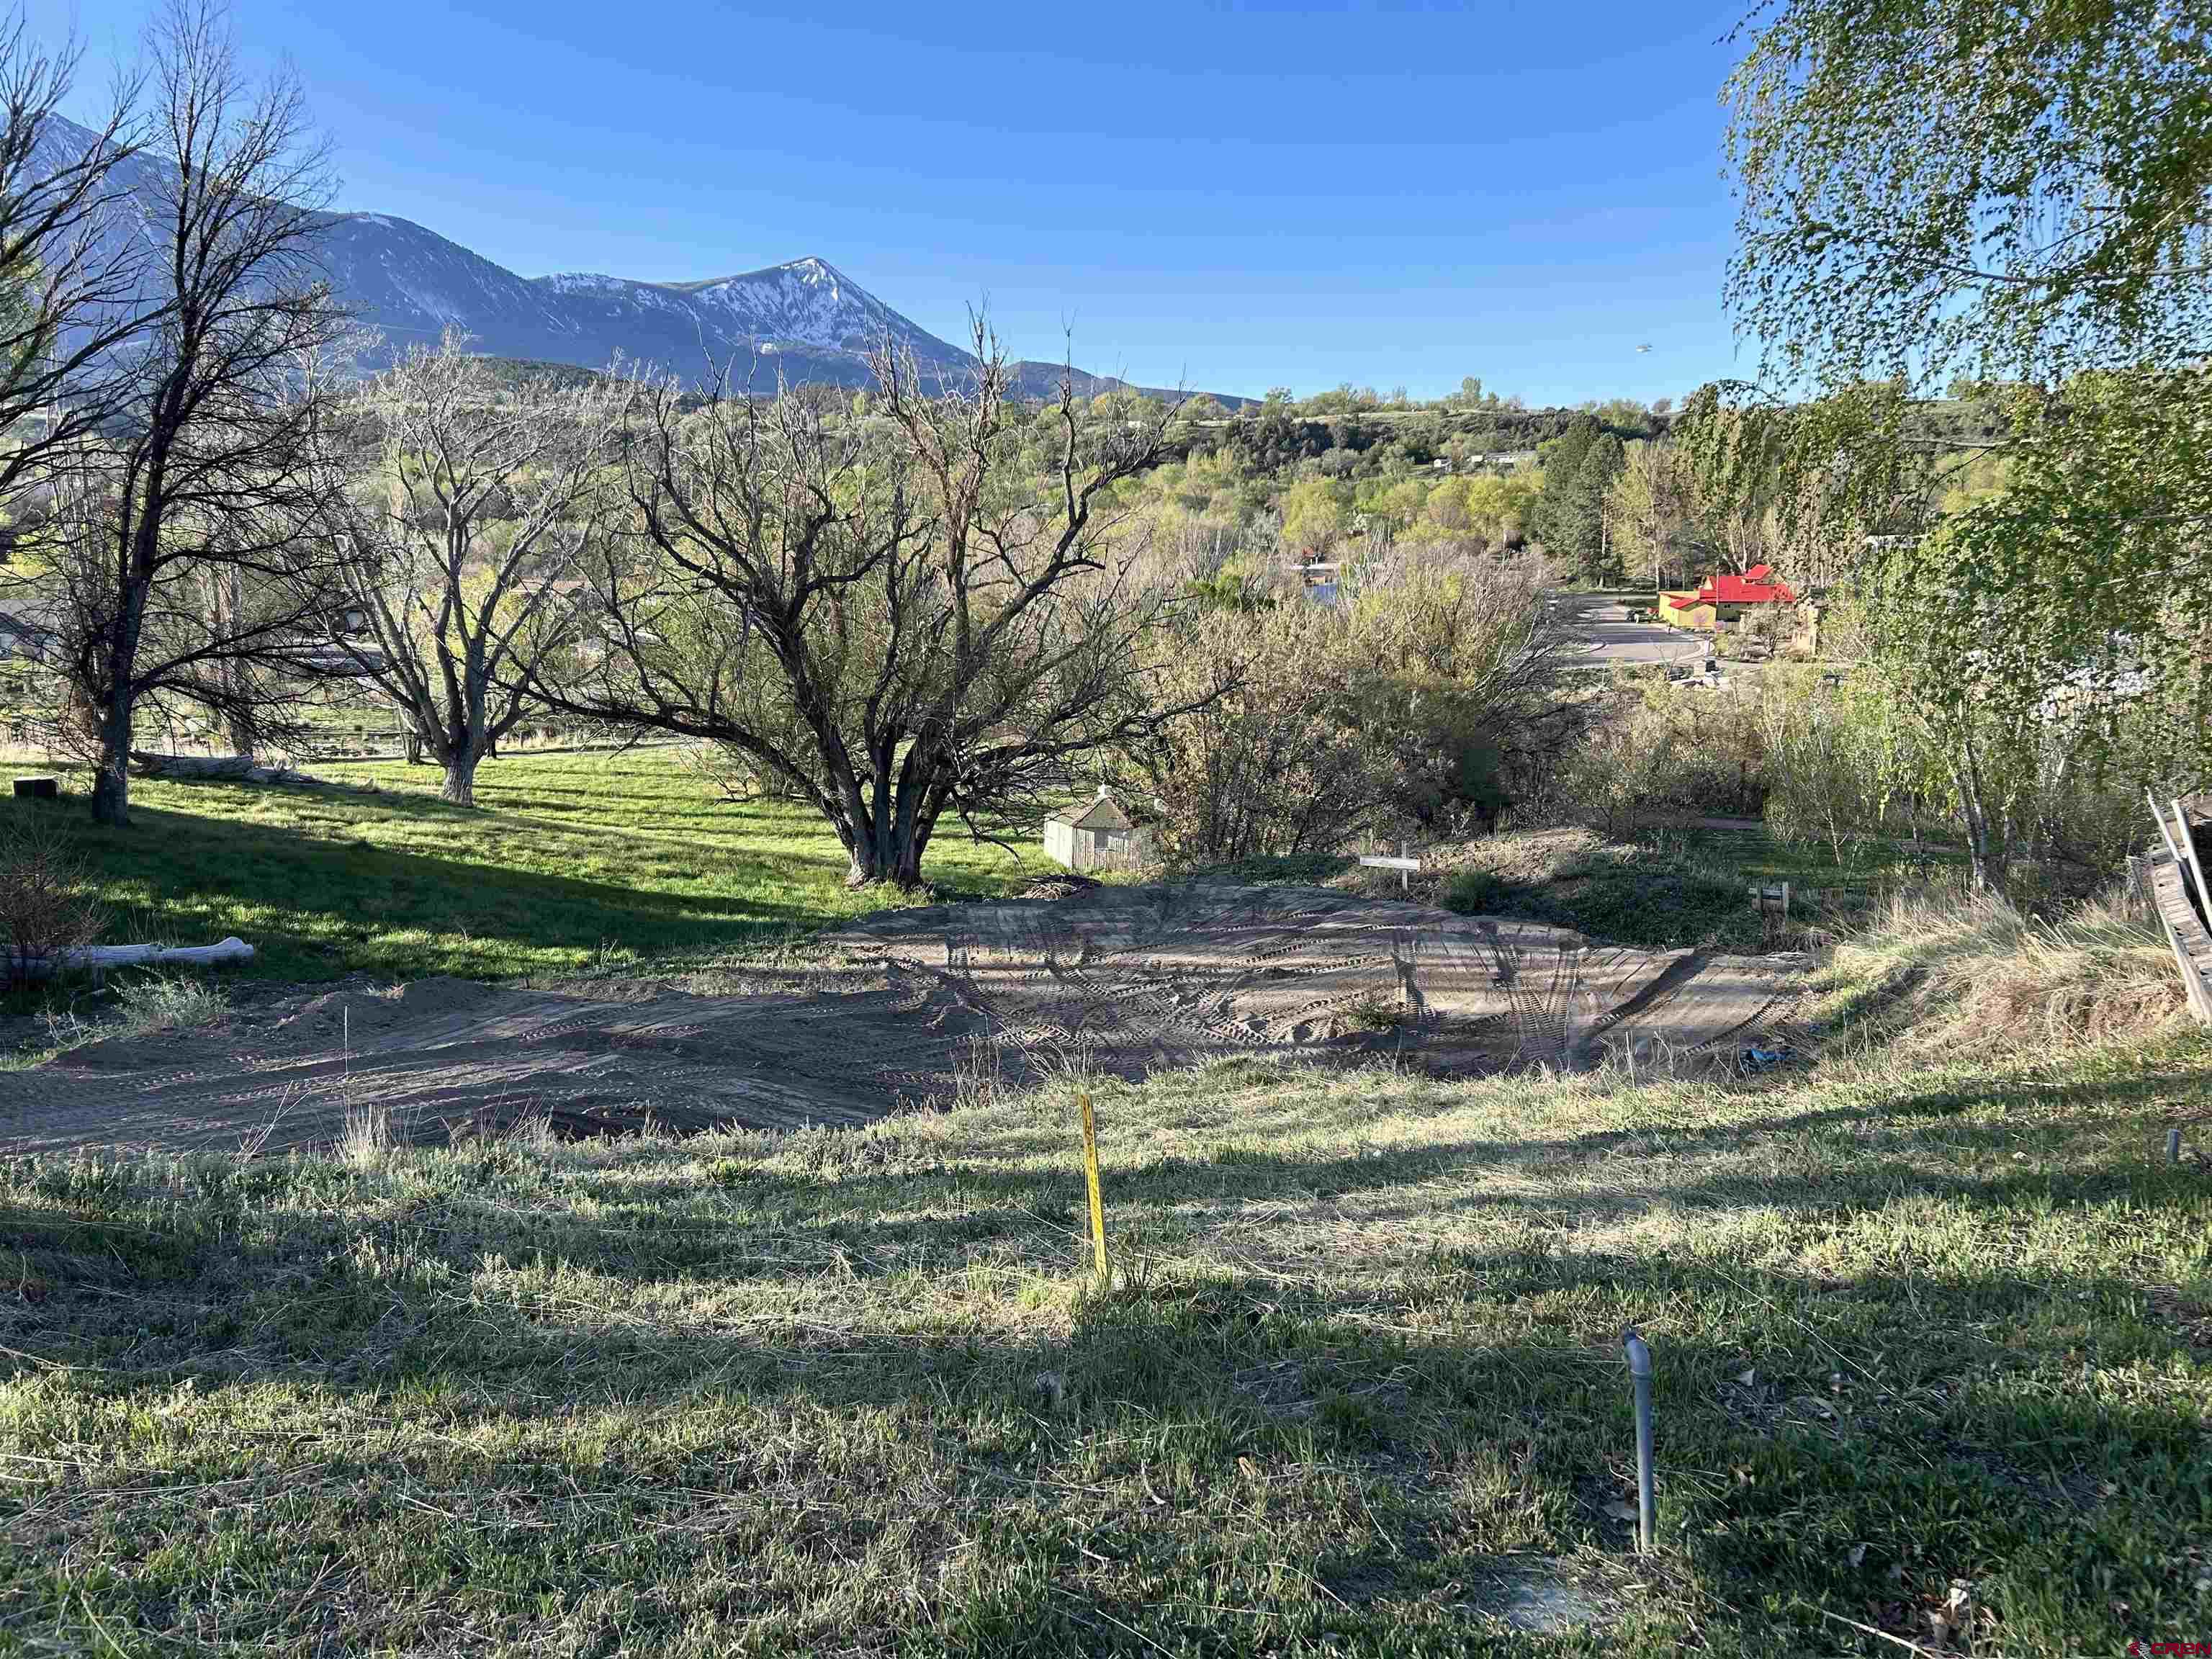 Paonia Town Lot with Mountain Views! Don't miss this opportunity to create your dream home in a picturesque setting with convenient access to amenities and breathtaking views. This lot comes with a Town of Paonia Water Tap, Sewer Tap, and Electric. It is located in walking distance to downtown Paonia, Jumbo trail system and Apple Valley Park. The path in front of property takes you to Apple Valley Park which features tennis courts, playground, creek, and a workout area.  Build your dream home today in Paonia!